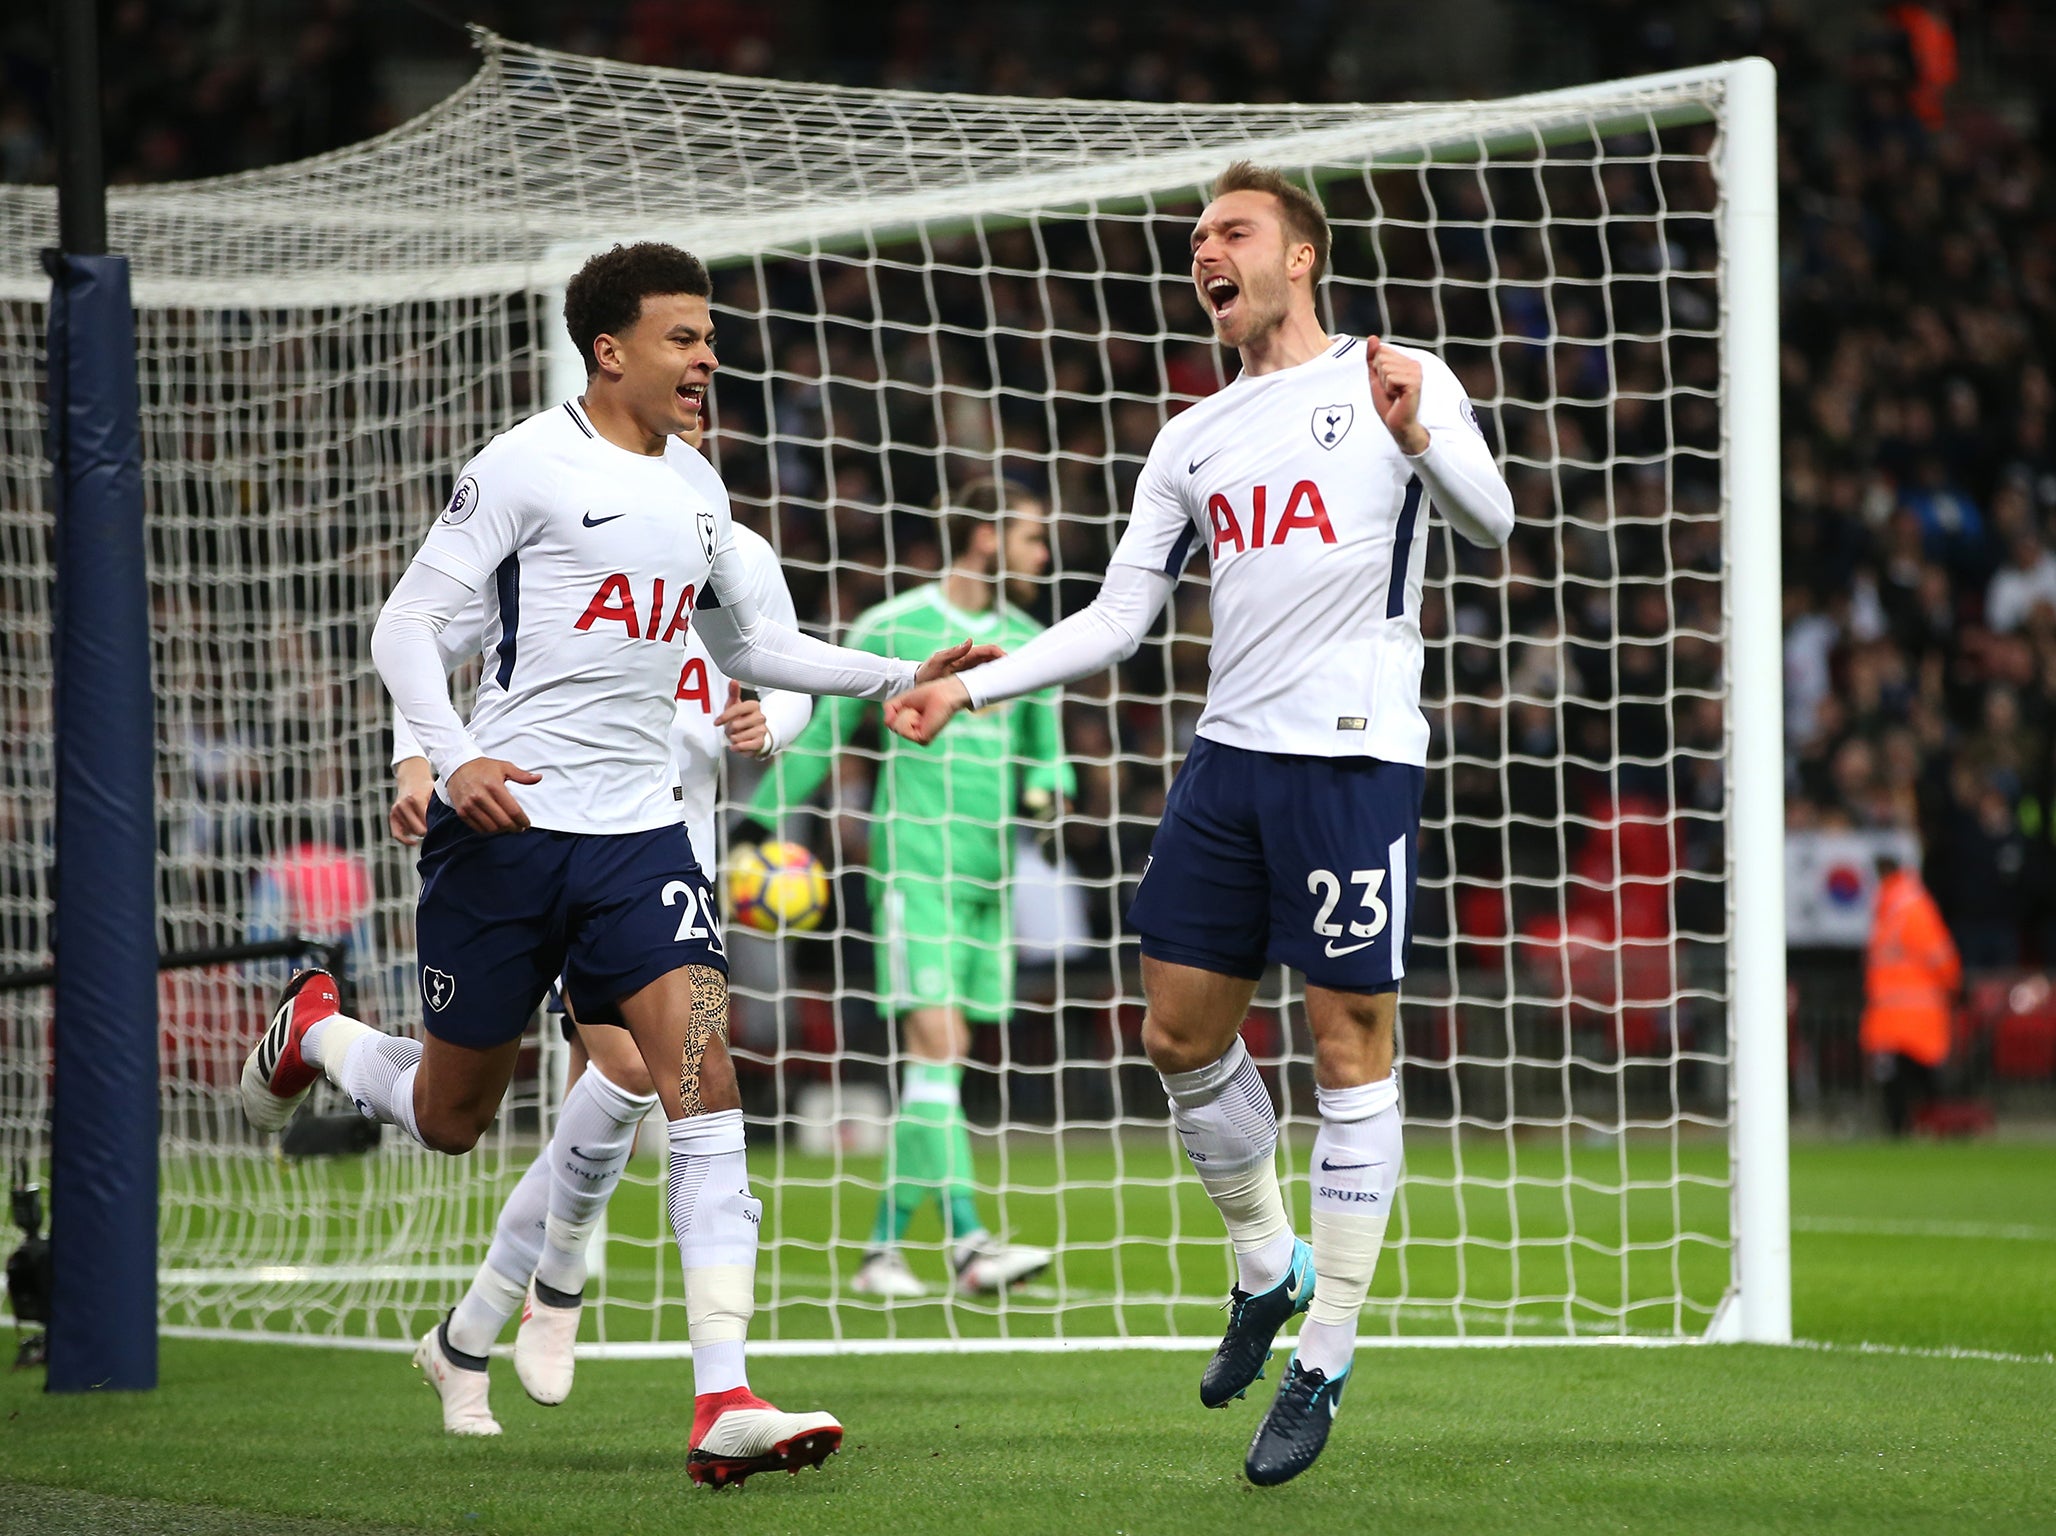 Eriksen scored the third-fasted Premier League goal ever